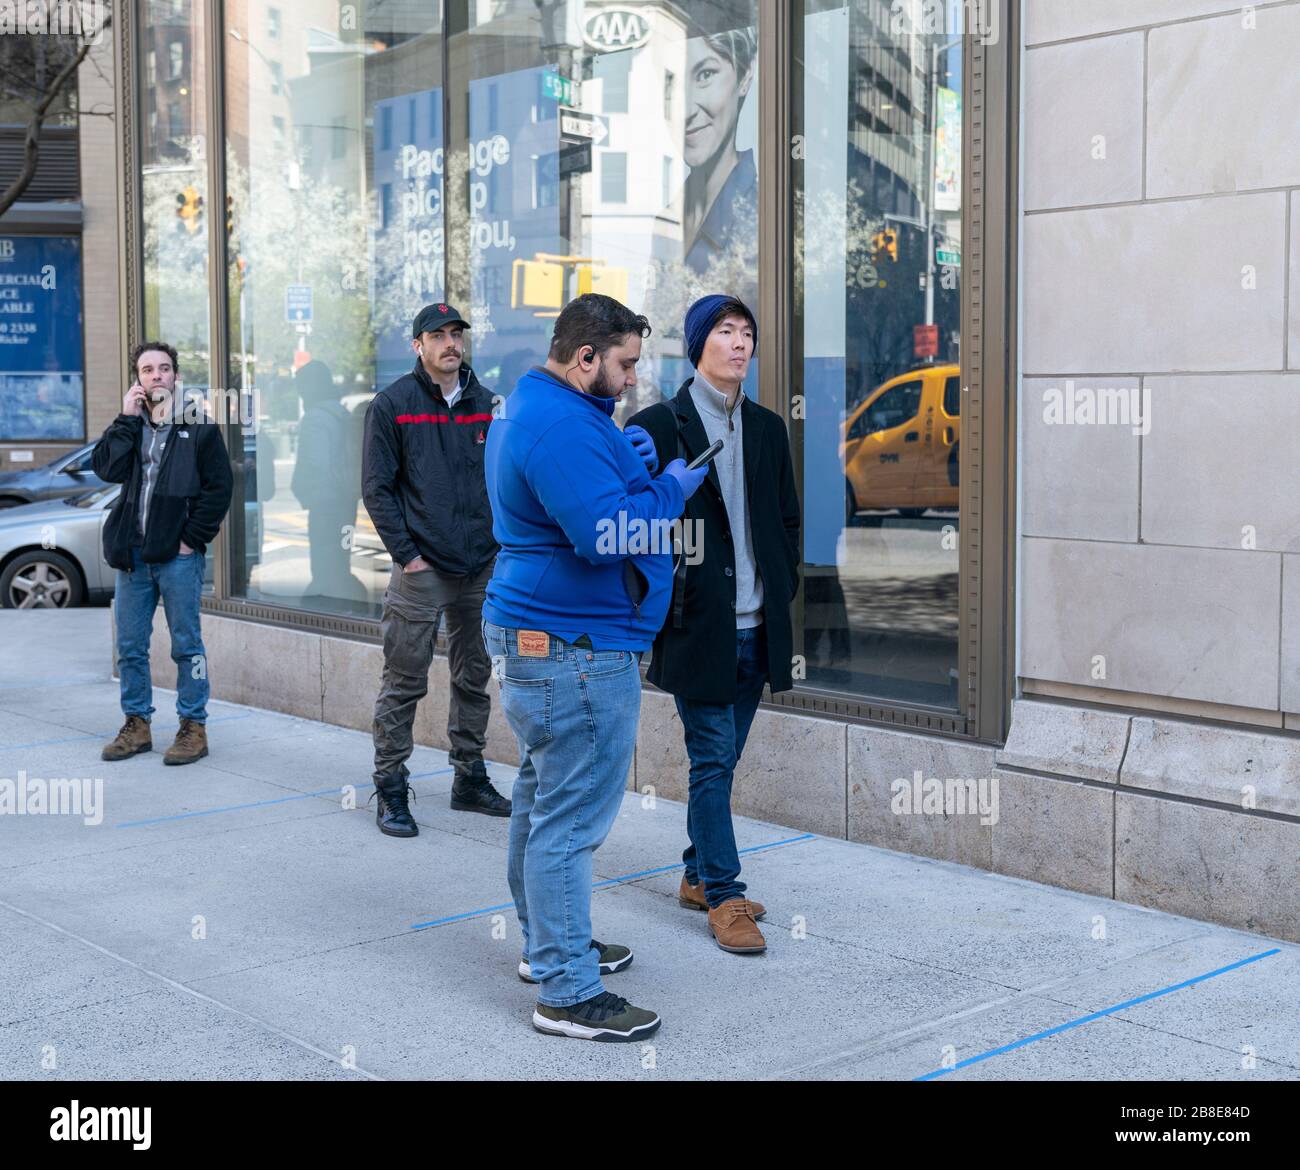 New York, NY - March 21, 2020: Worker takes order on the street from customers to maintain social distances of 6 feet at Best Buy electronic store on Broadway Stock Photo